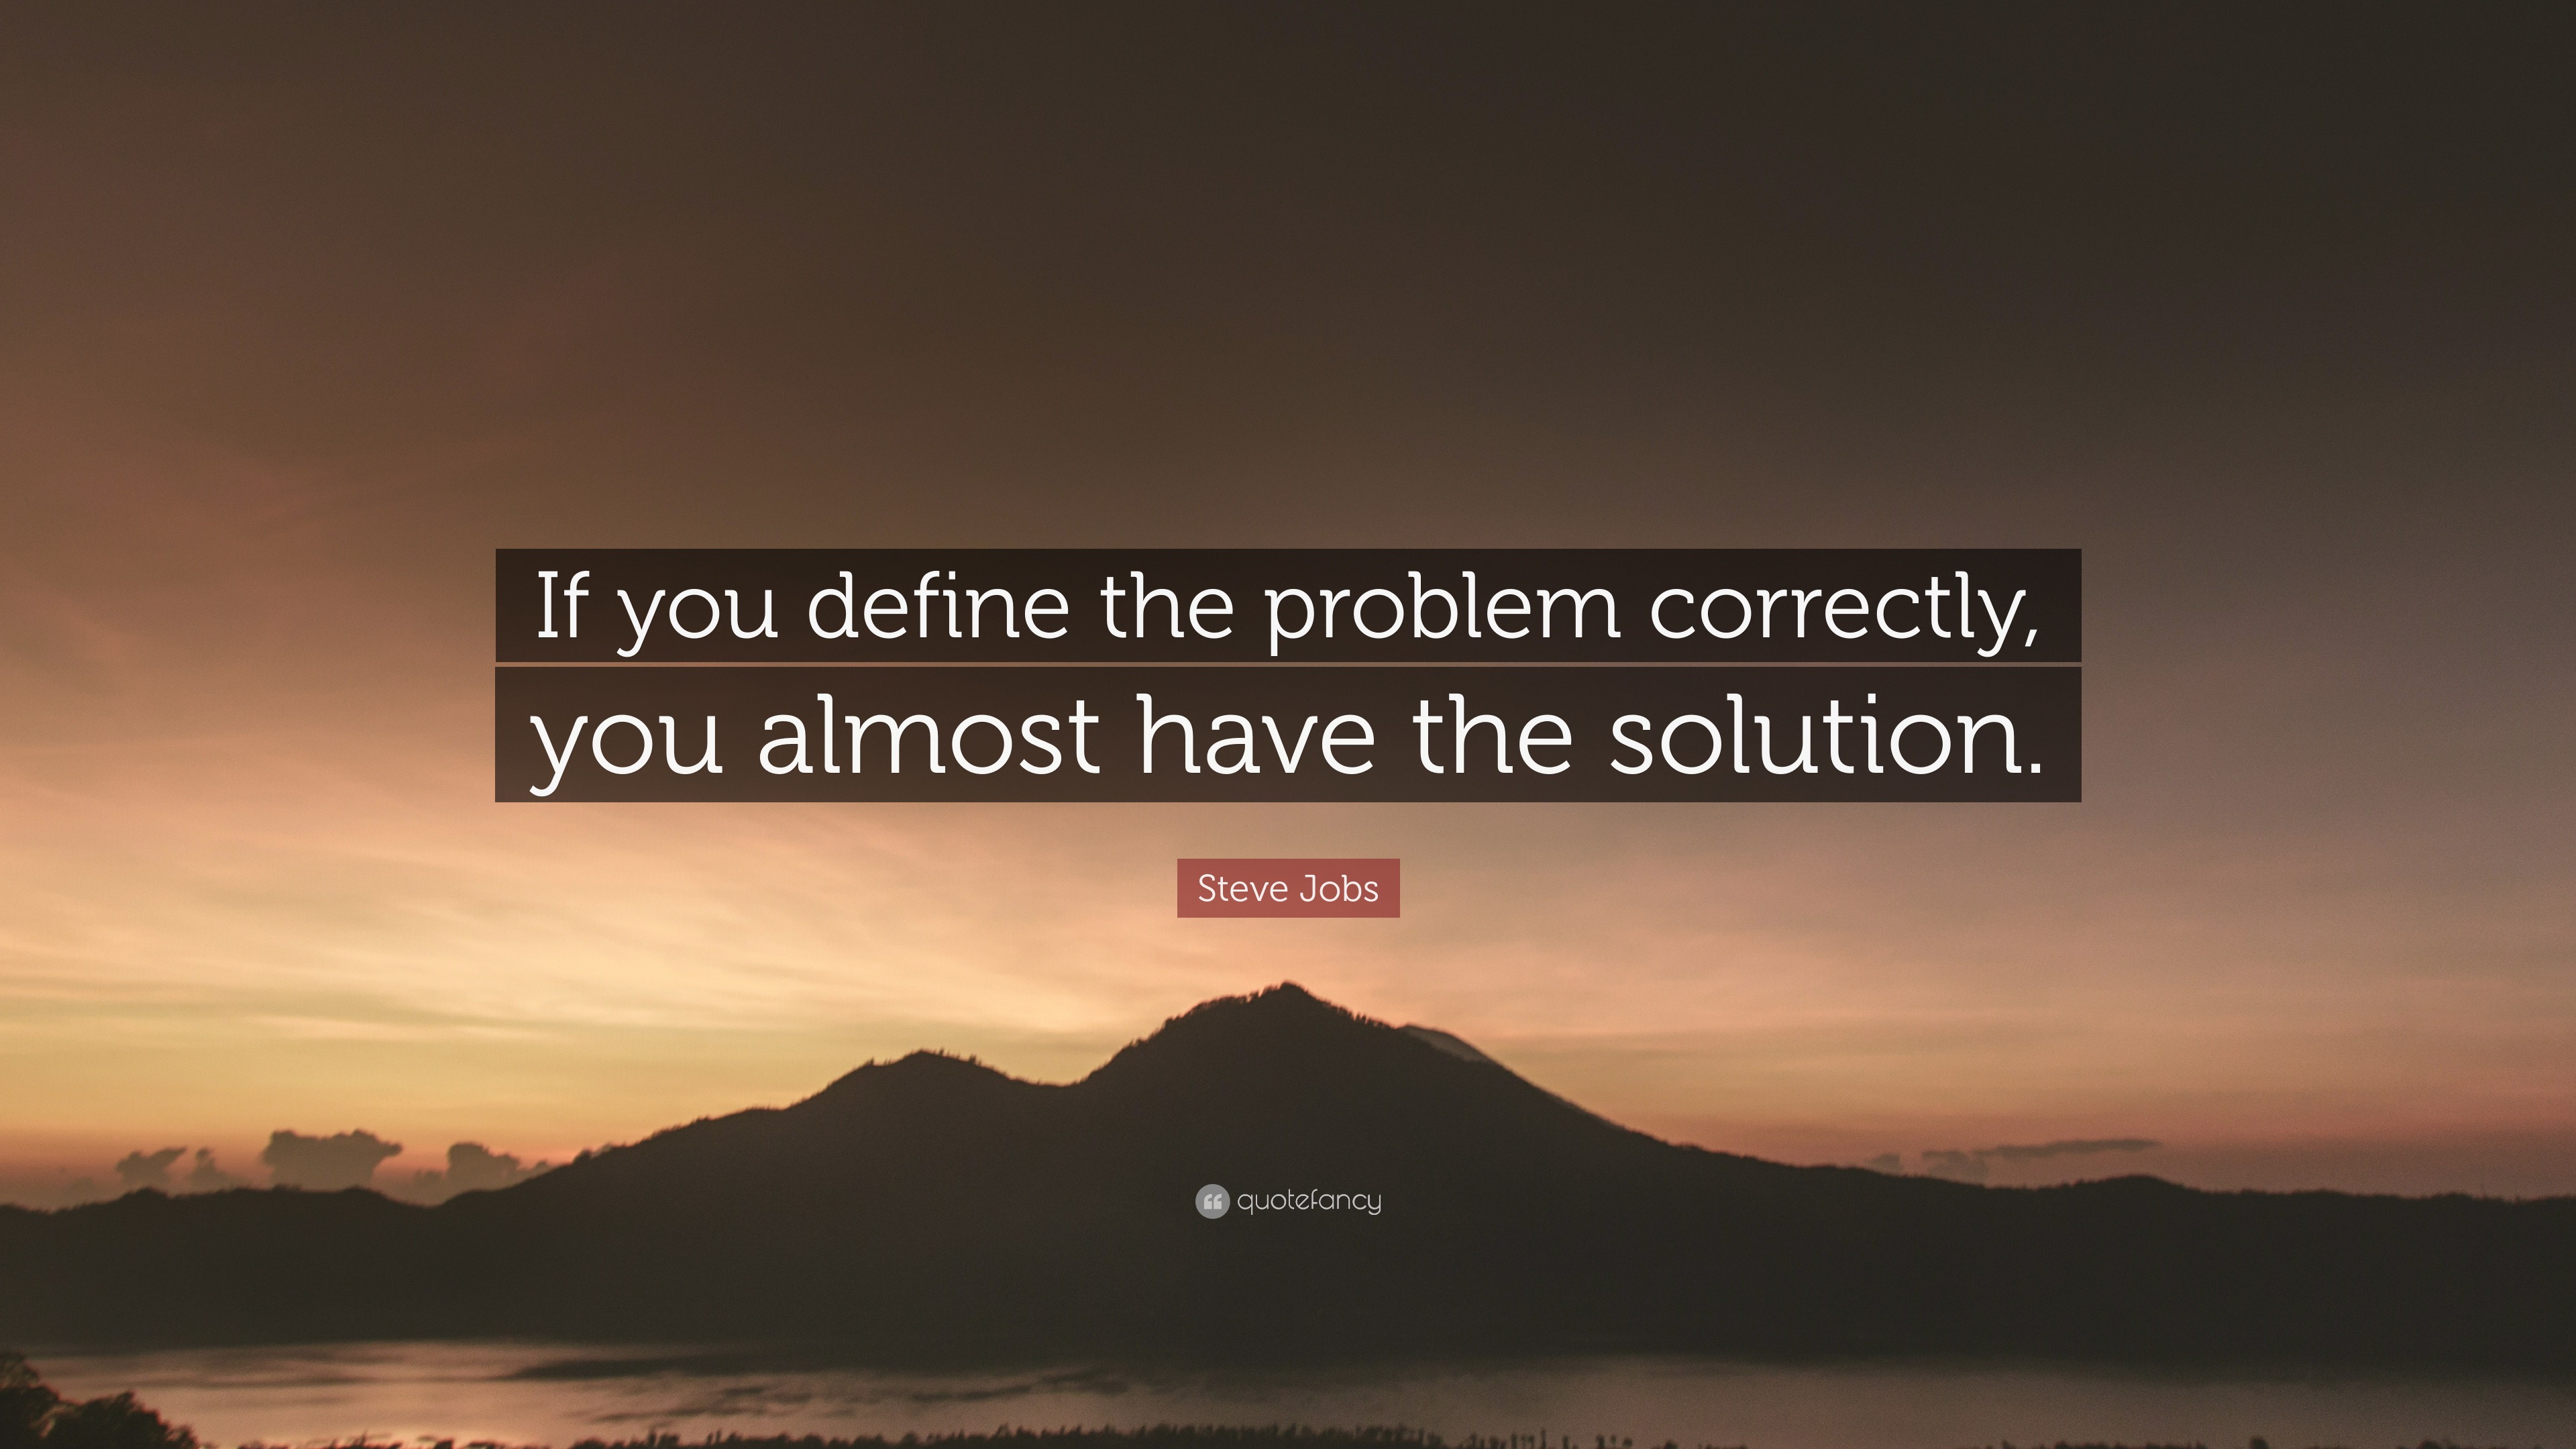 Steve Jobs Quote: “If you define the problem correctly, you almost have ...